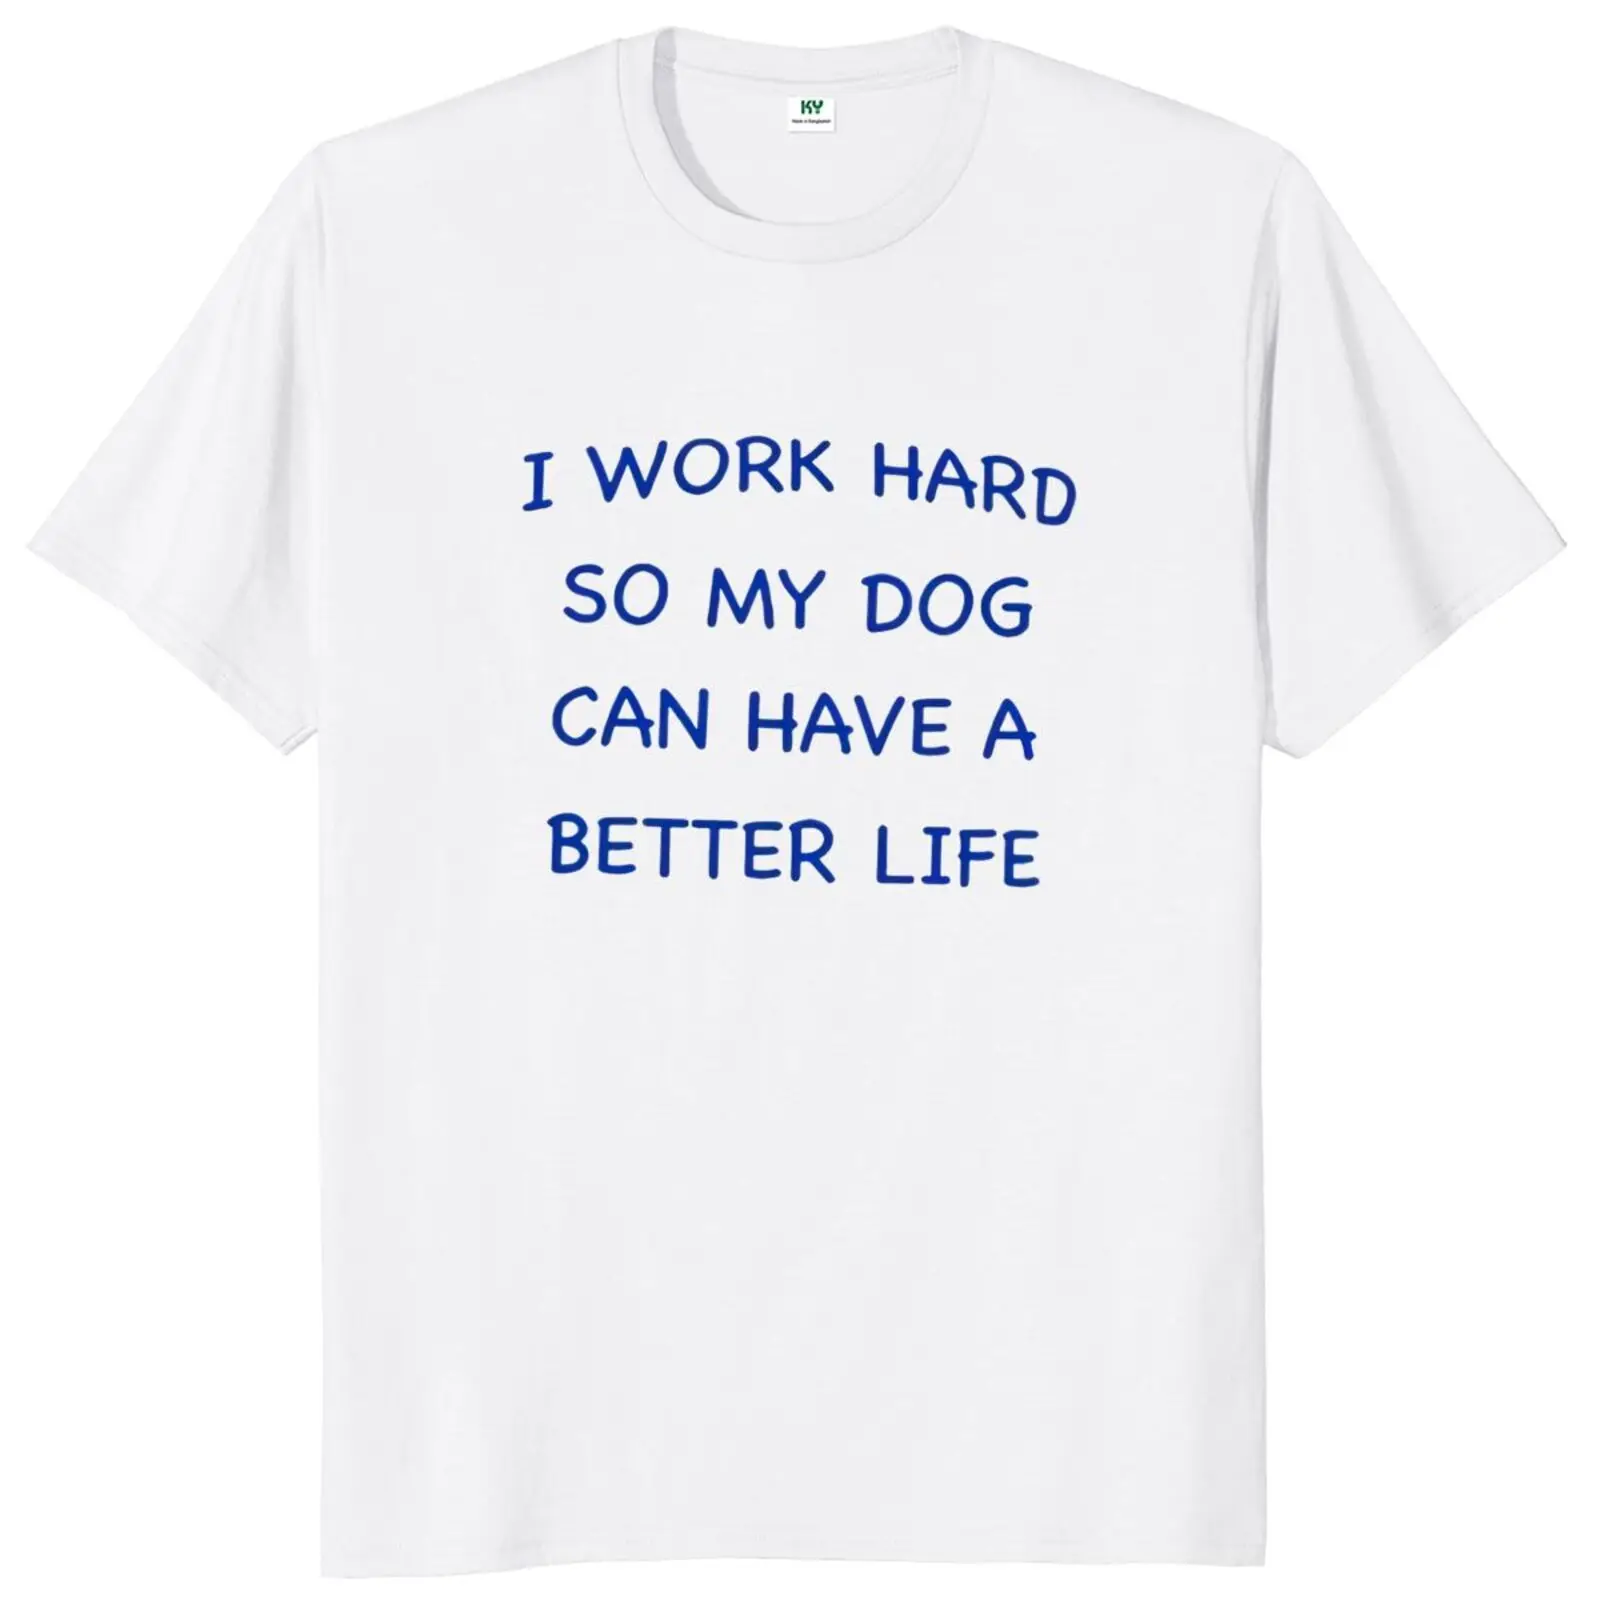 

I Work Hard My Dog Have A Better Life T-shirt Funny Slogan Graphic Dog Lovers Phrase Tee Summer Casual Unisex Oversized T Shirt